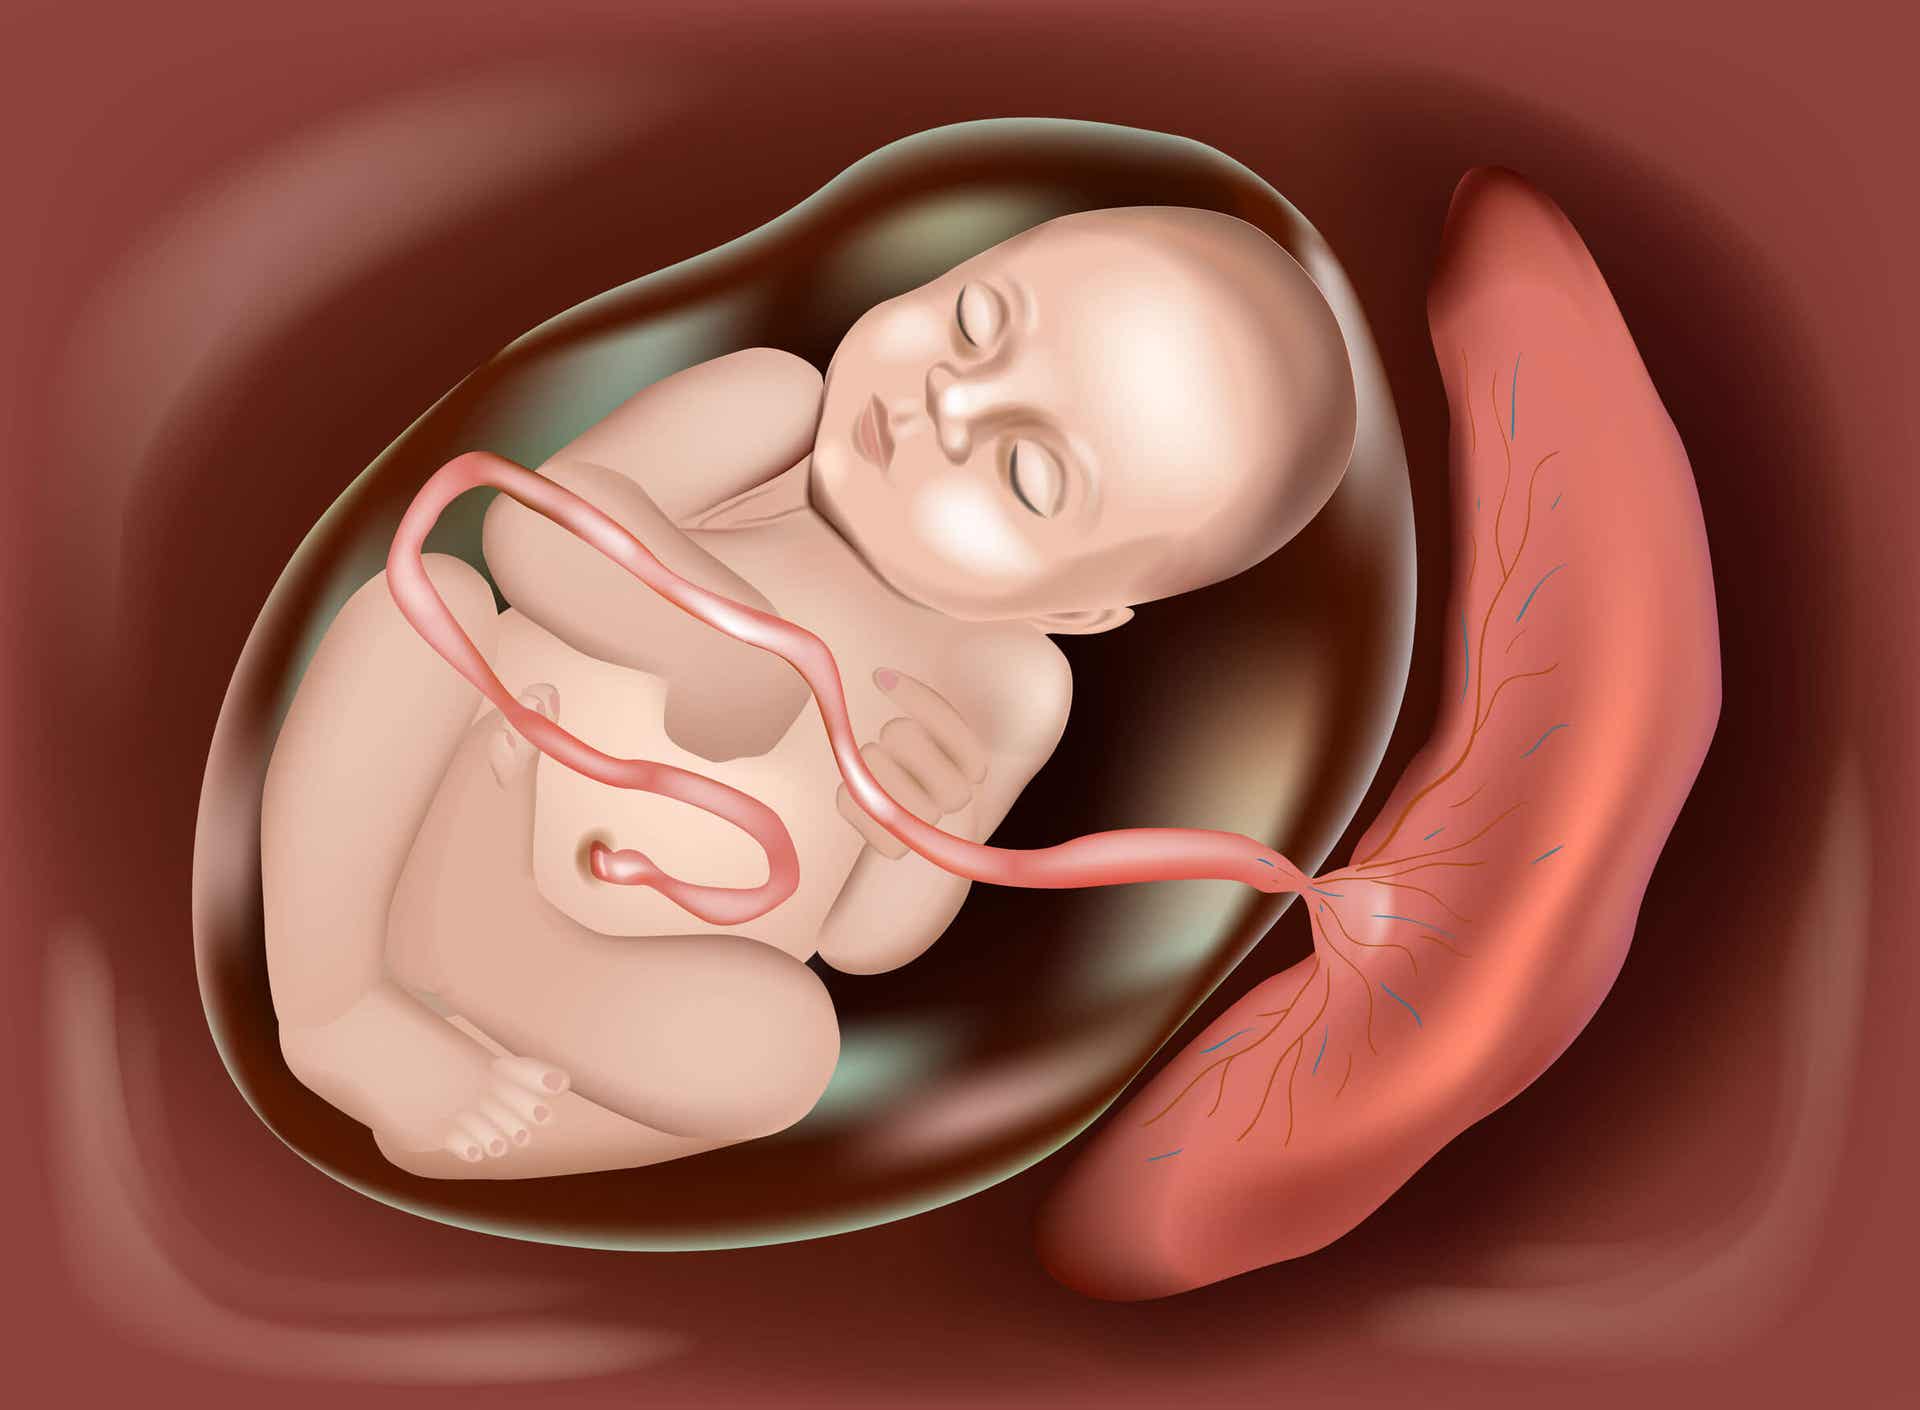 A computerized drawing of a baby in the womb, connected to the placenta.